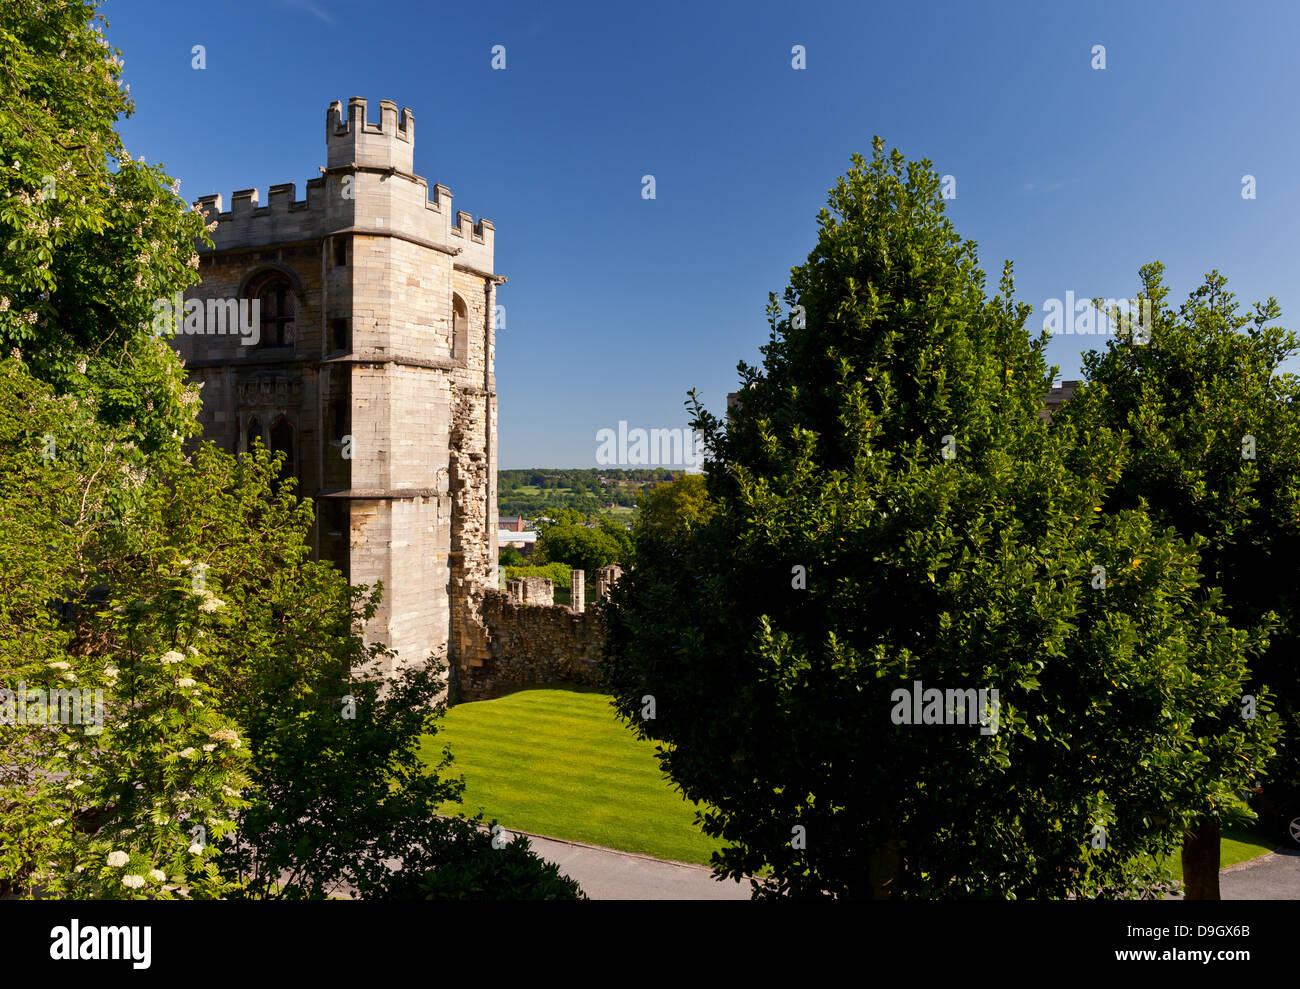 Lincoln - Medieval Bishops' Palace; Lincoln, Lincolnshire, UK, Europe Stock Photo